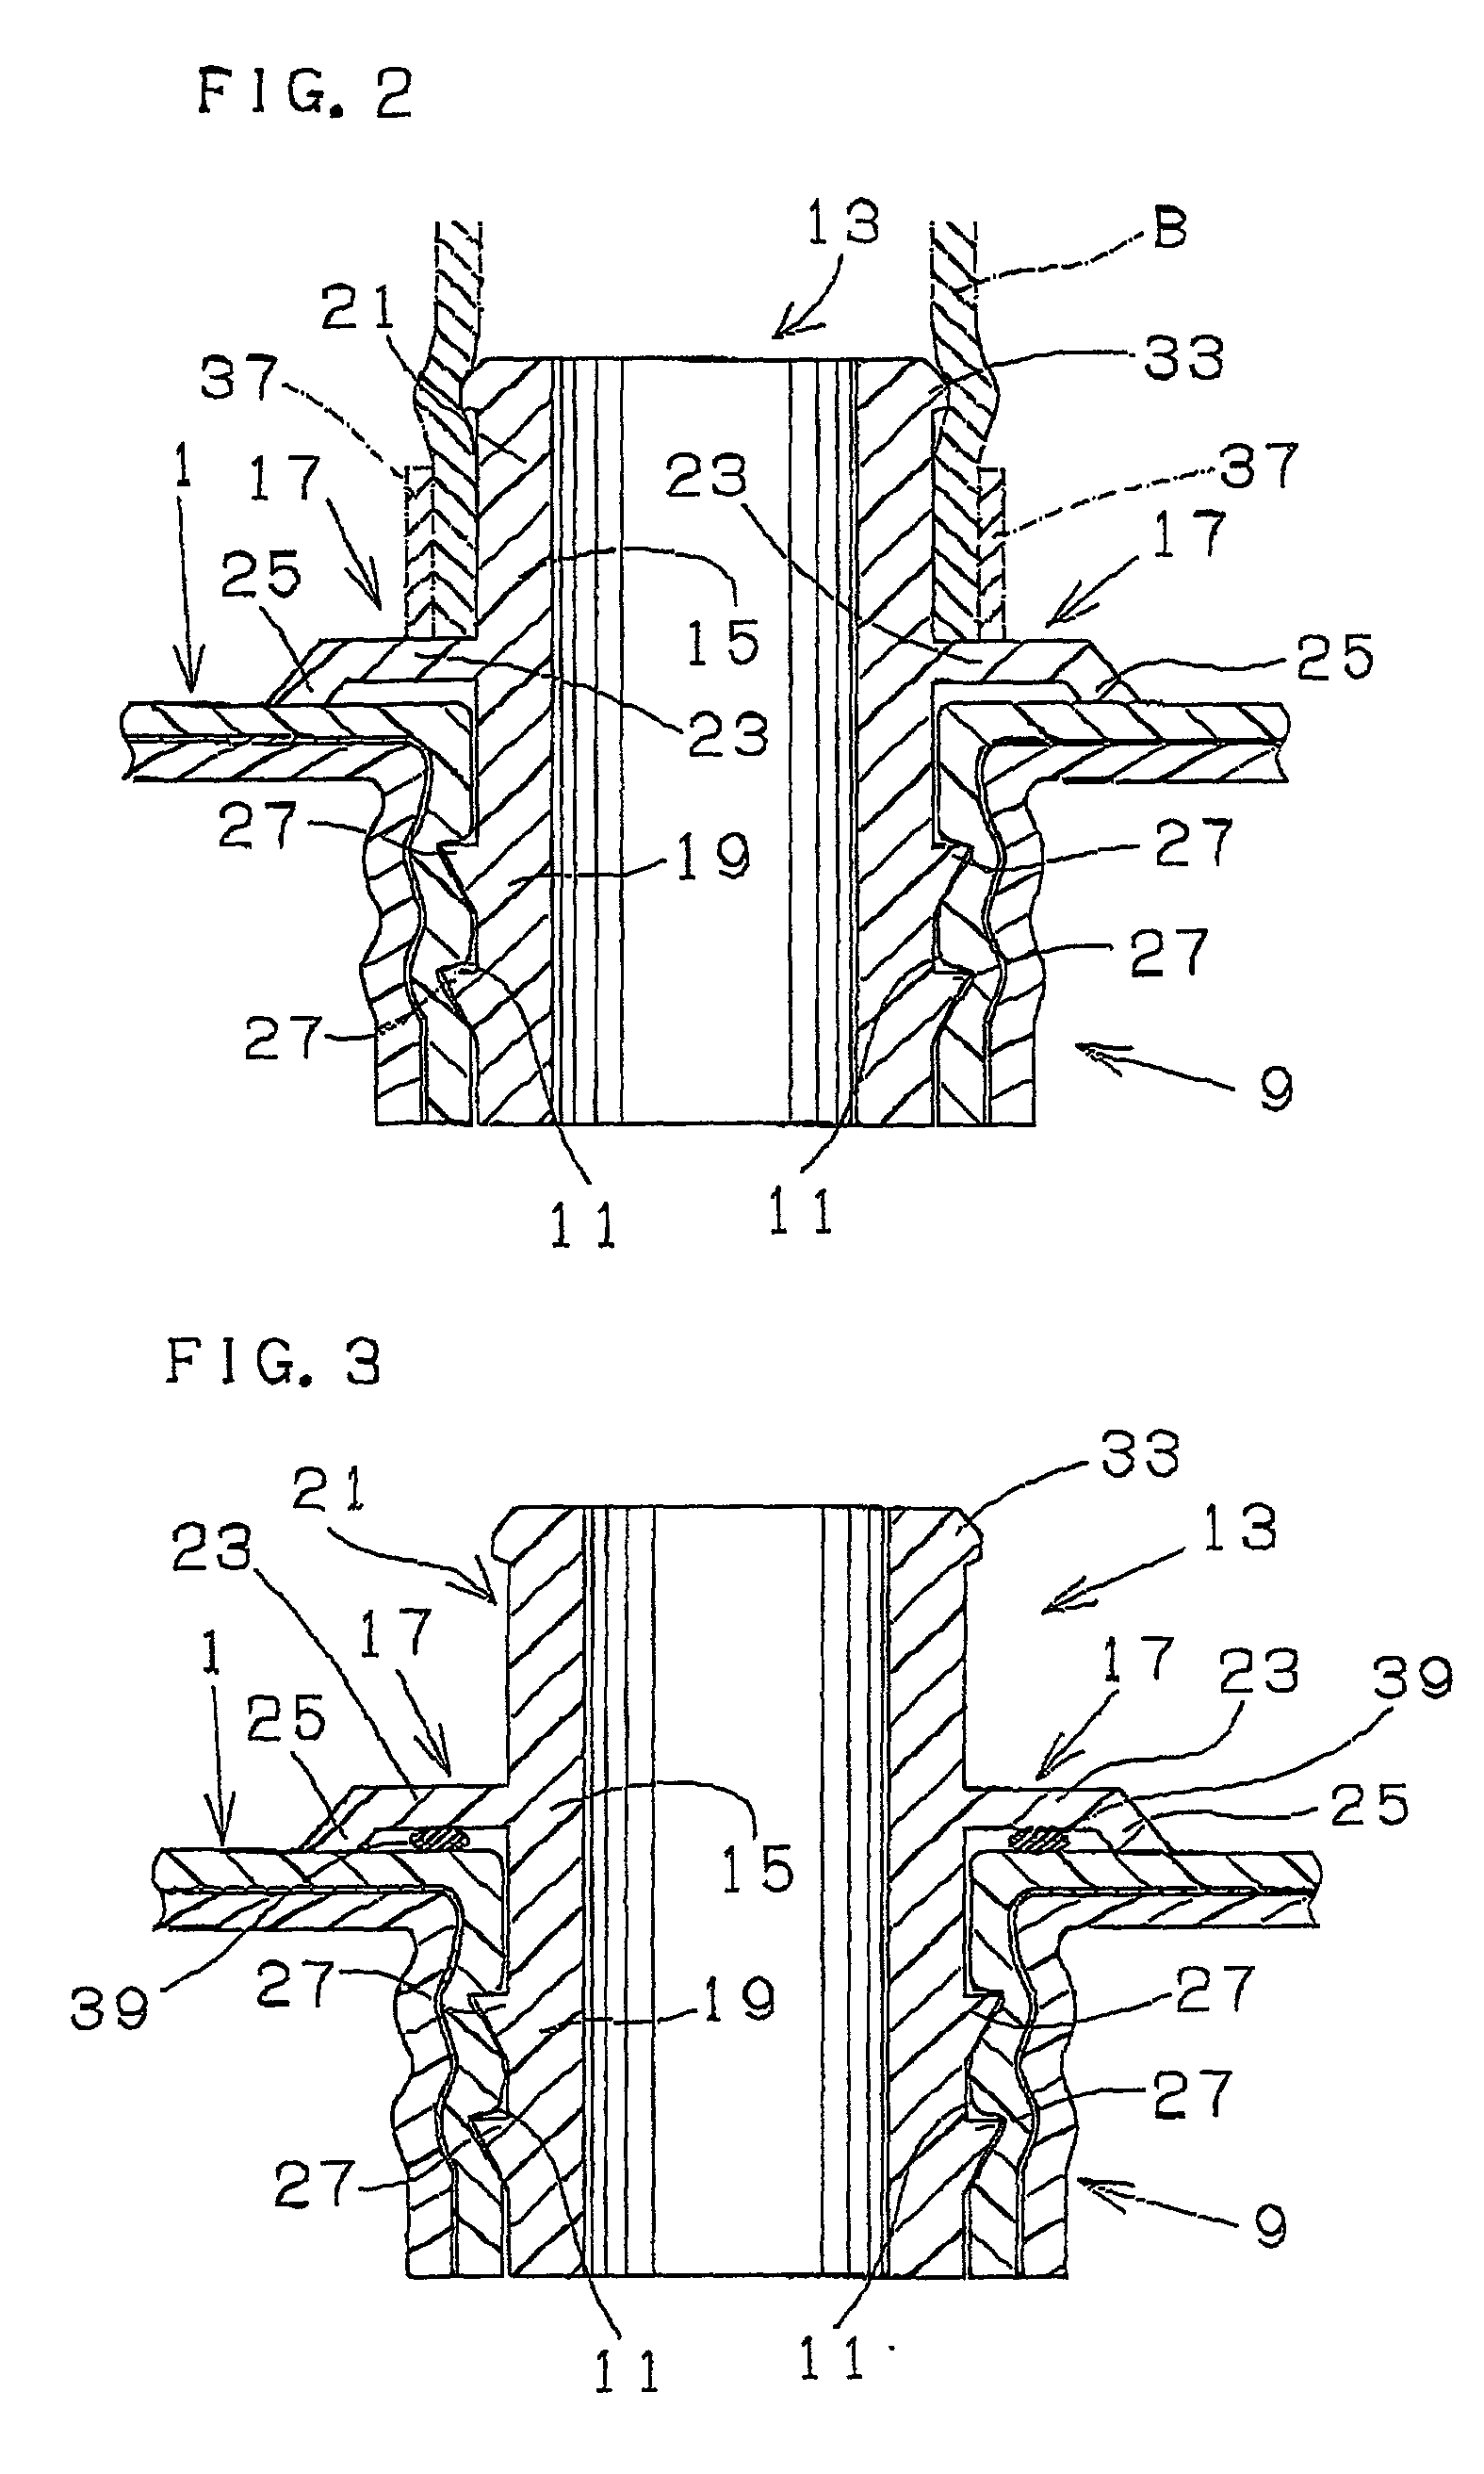 Structure for connecting tubular member to fuel tank